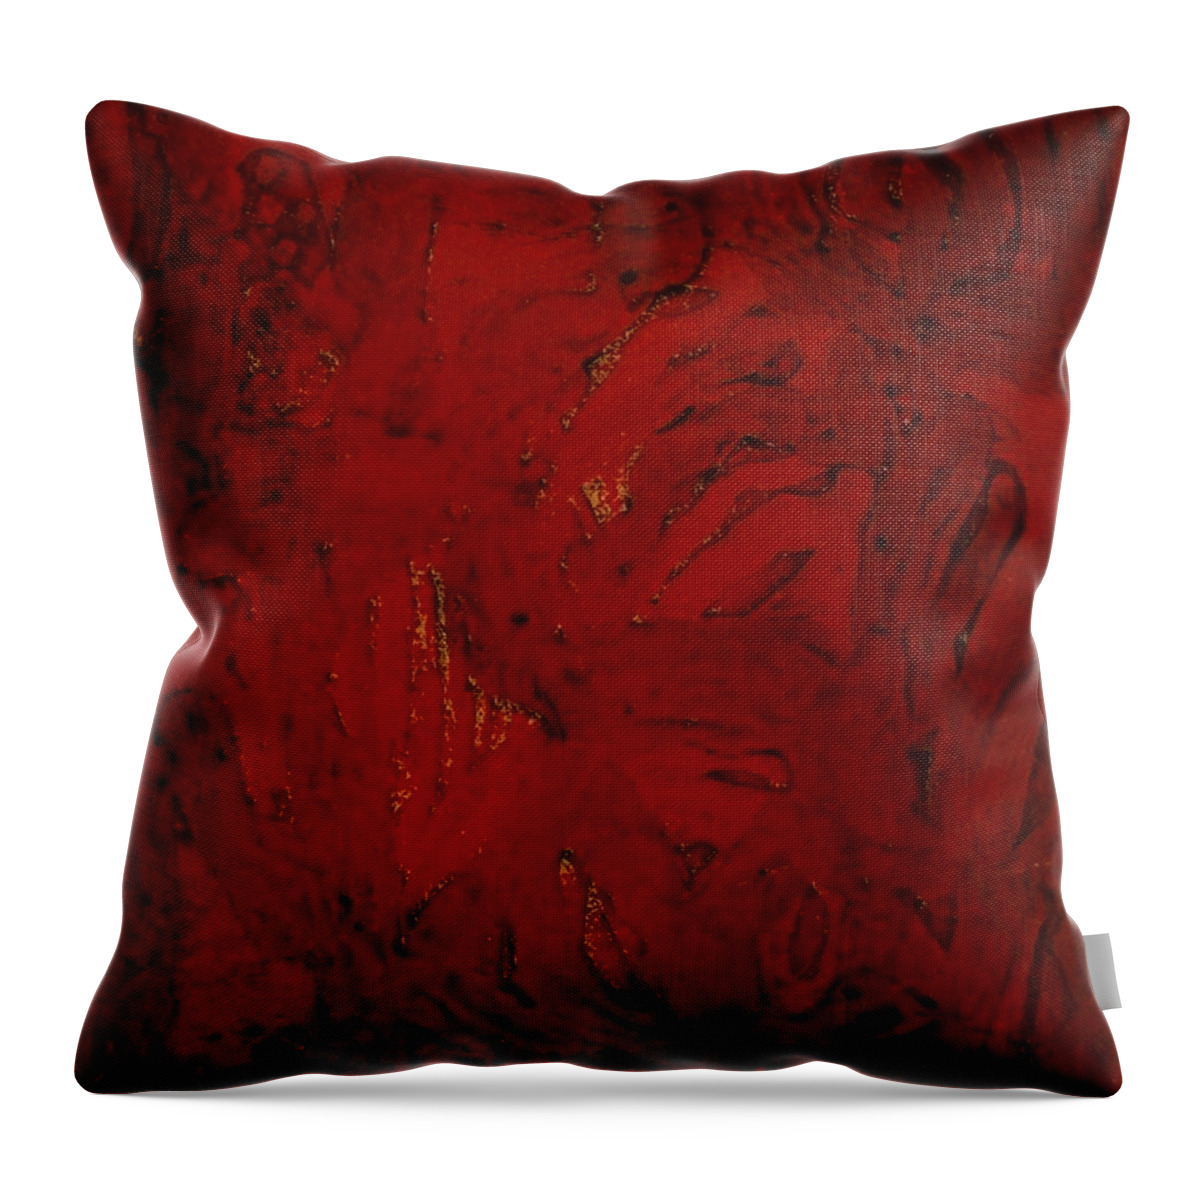 Abstract Throw Pillow featuring the painting Squirm by Erika Jean Chamberlin